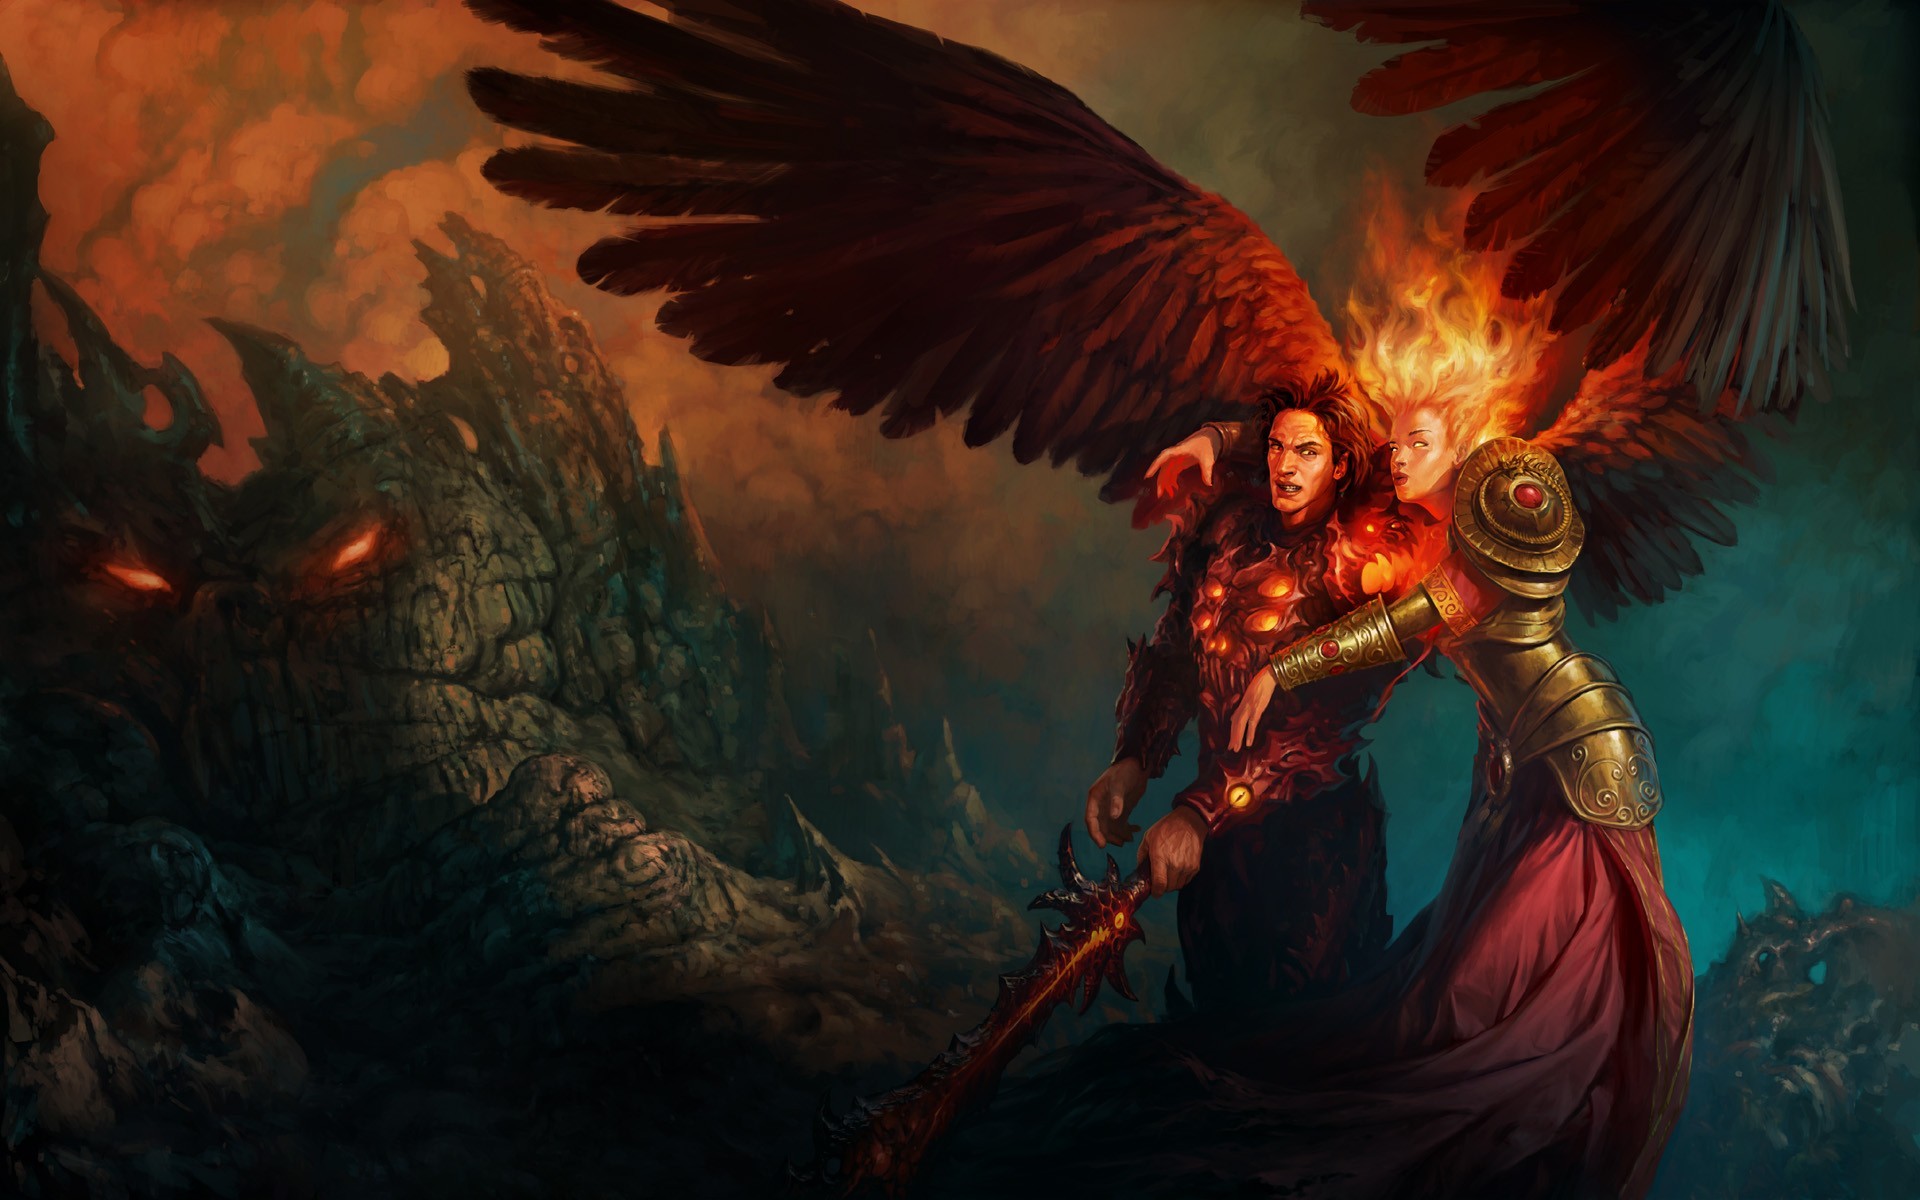 Heroes Of Might And Magic Might And Magic Artwork Fantasy Art Angel Wings Sword Women Fire 1920x1200